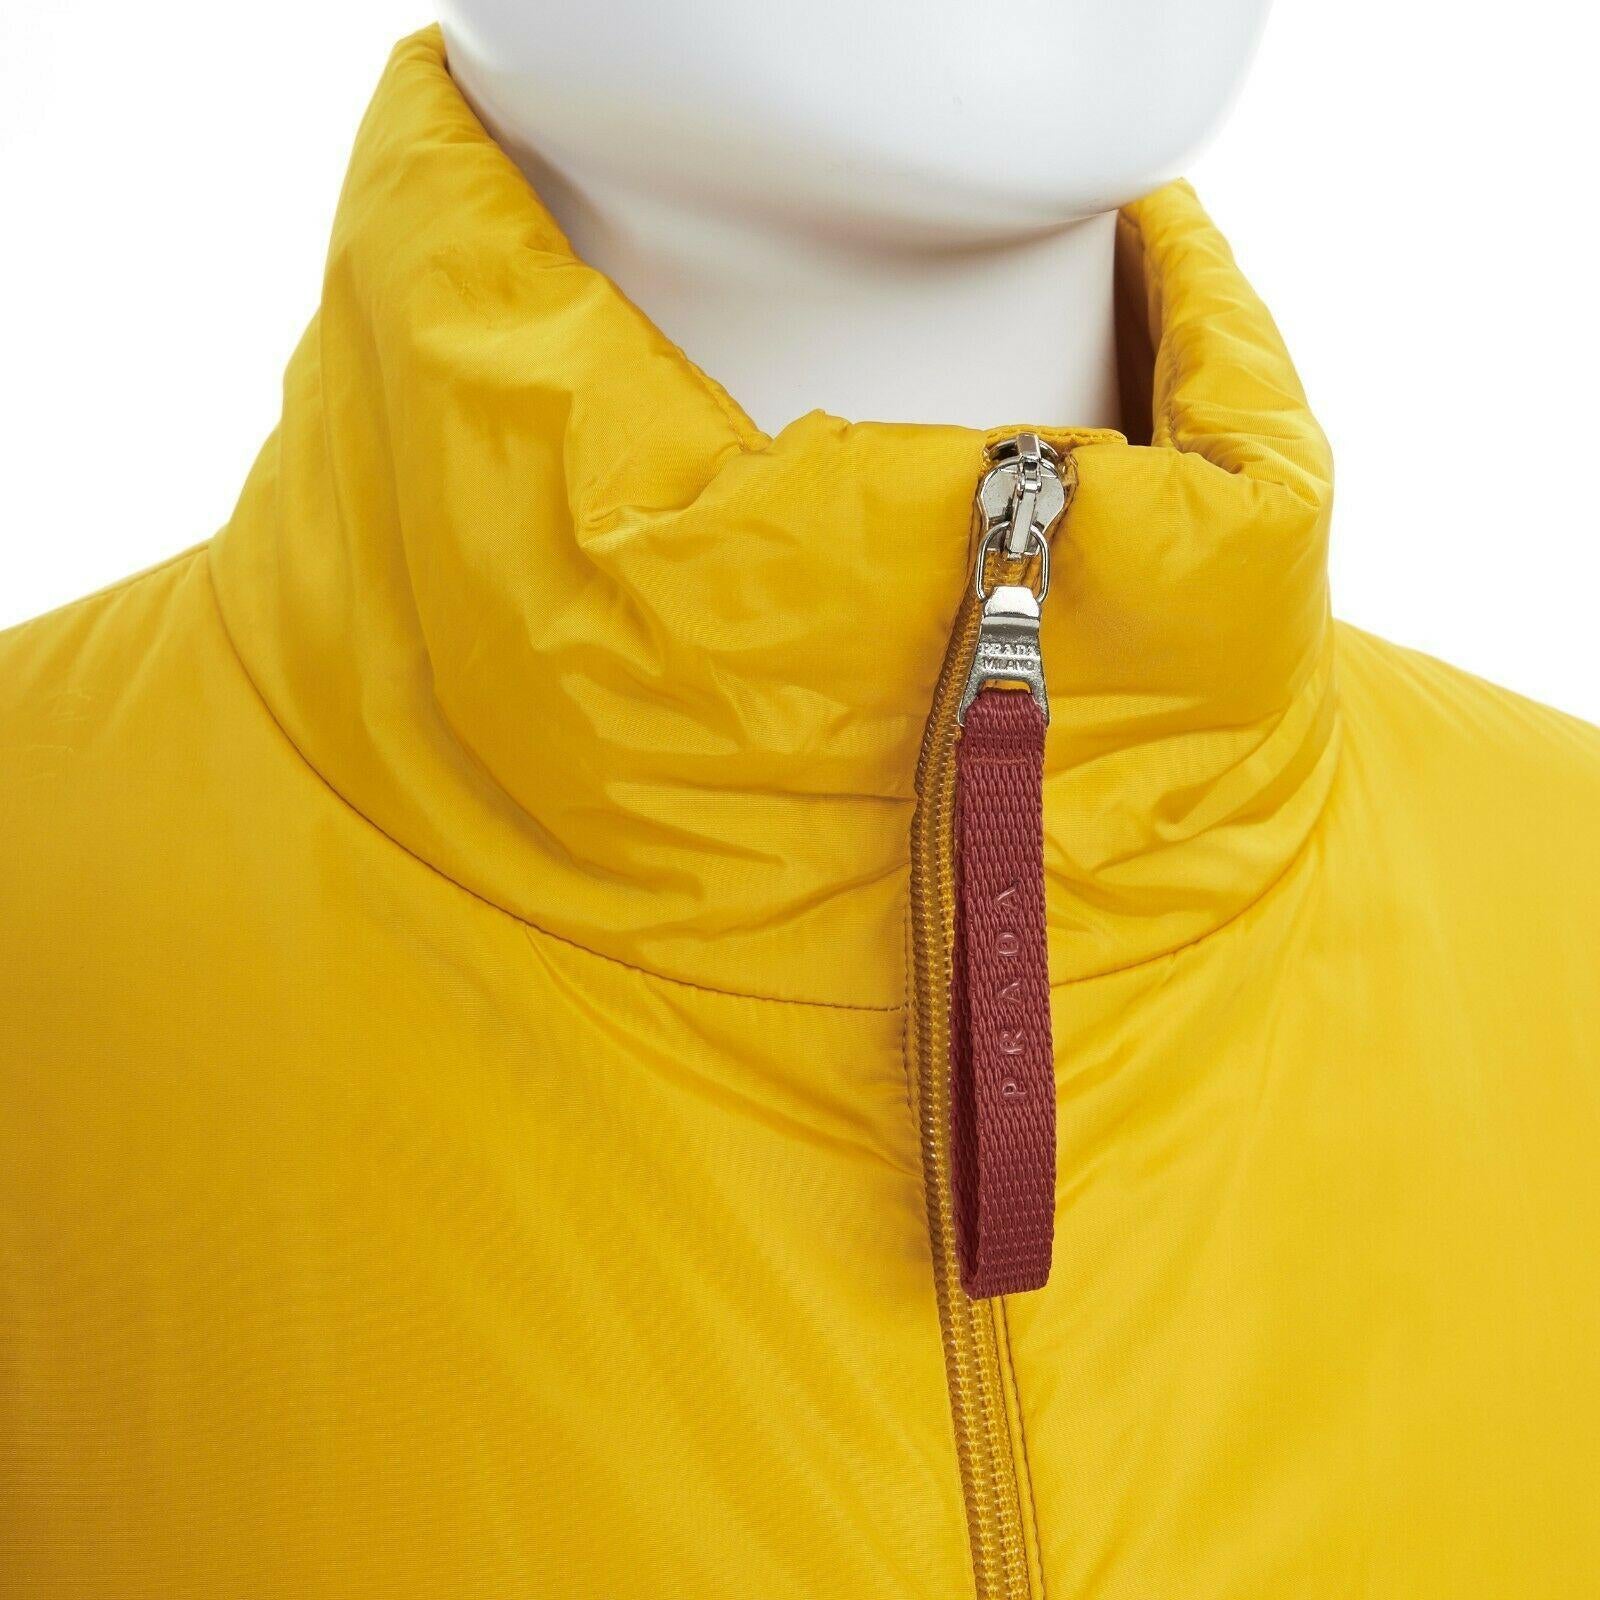 new PRADA Red Line yellow polyester padded long length snowboard jacket IT46 S
PRADA RED LINE
100% nylon. 100% polyester padding. Yellow. 
Stand collar. Zip front closure. Signature Red line nylon zipper pull. 
Long sleeves. Elasticated dual layered